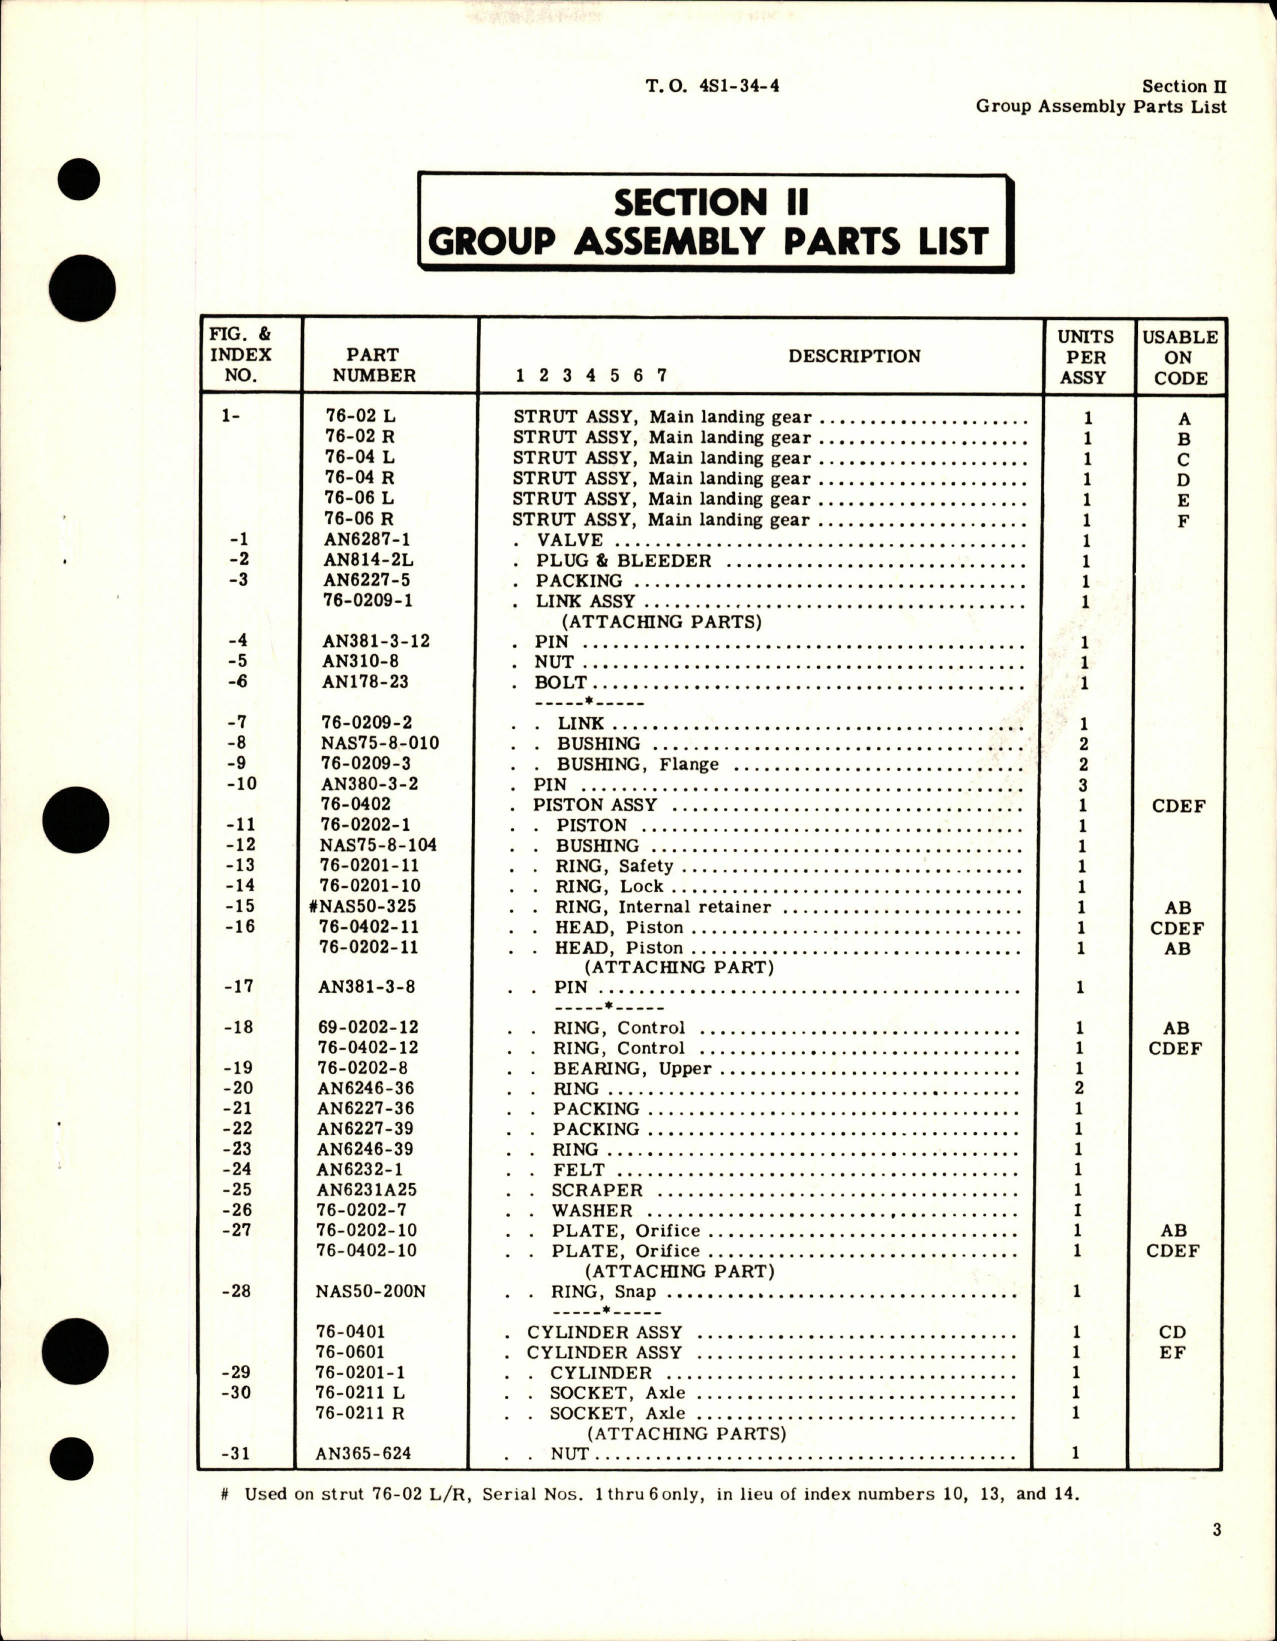 Sample page 5 from AirCorps Library document: Illustrated Parts Breakdown for Main Landing Gear Strut Assembly - Models 76-02, 76-04, and 76-06